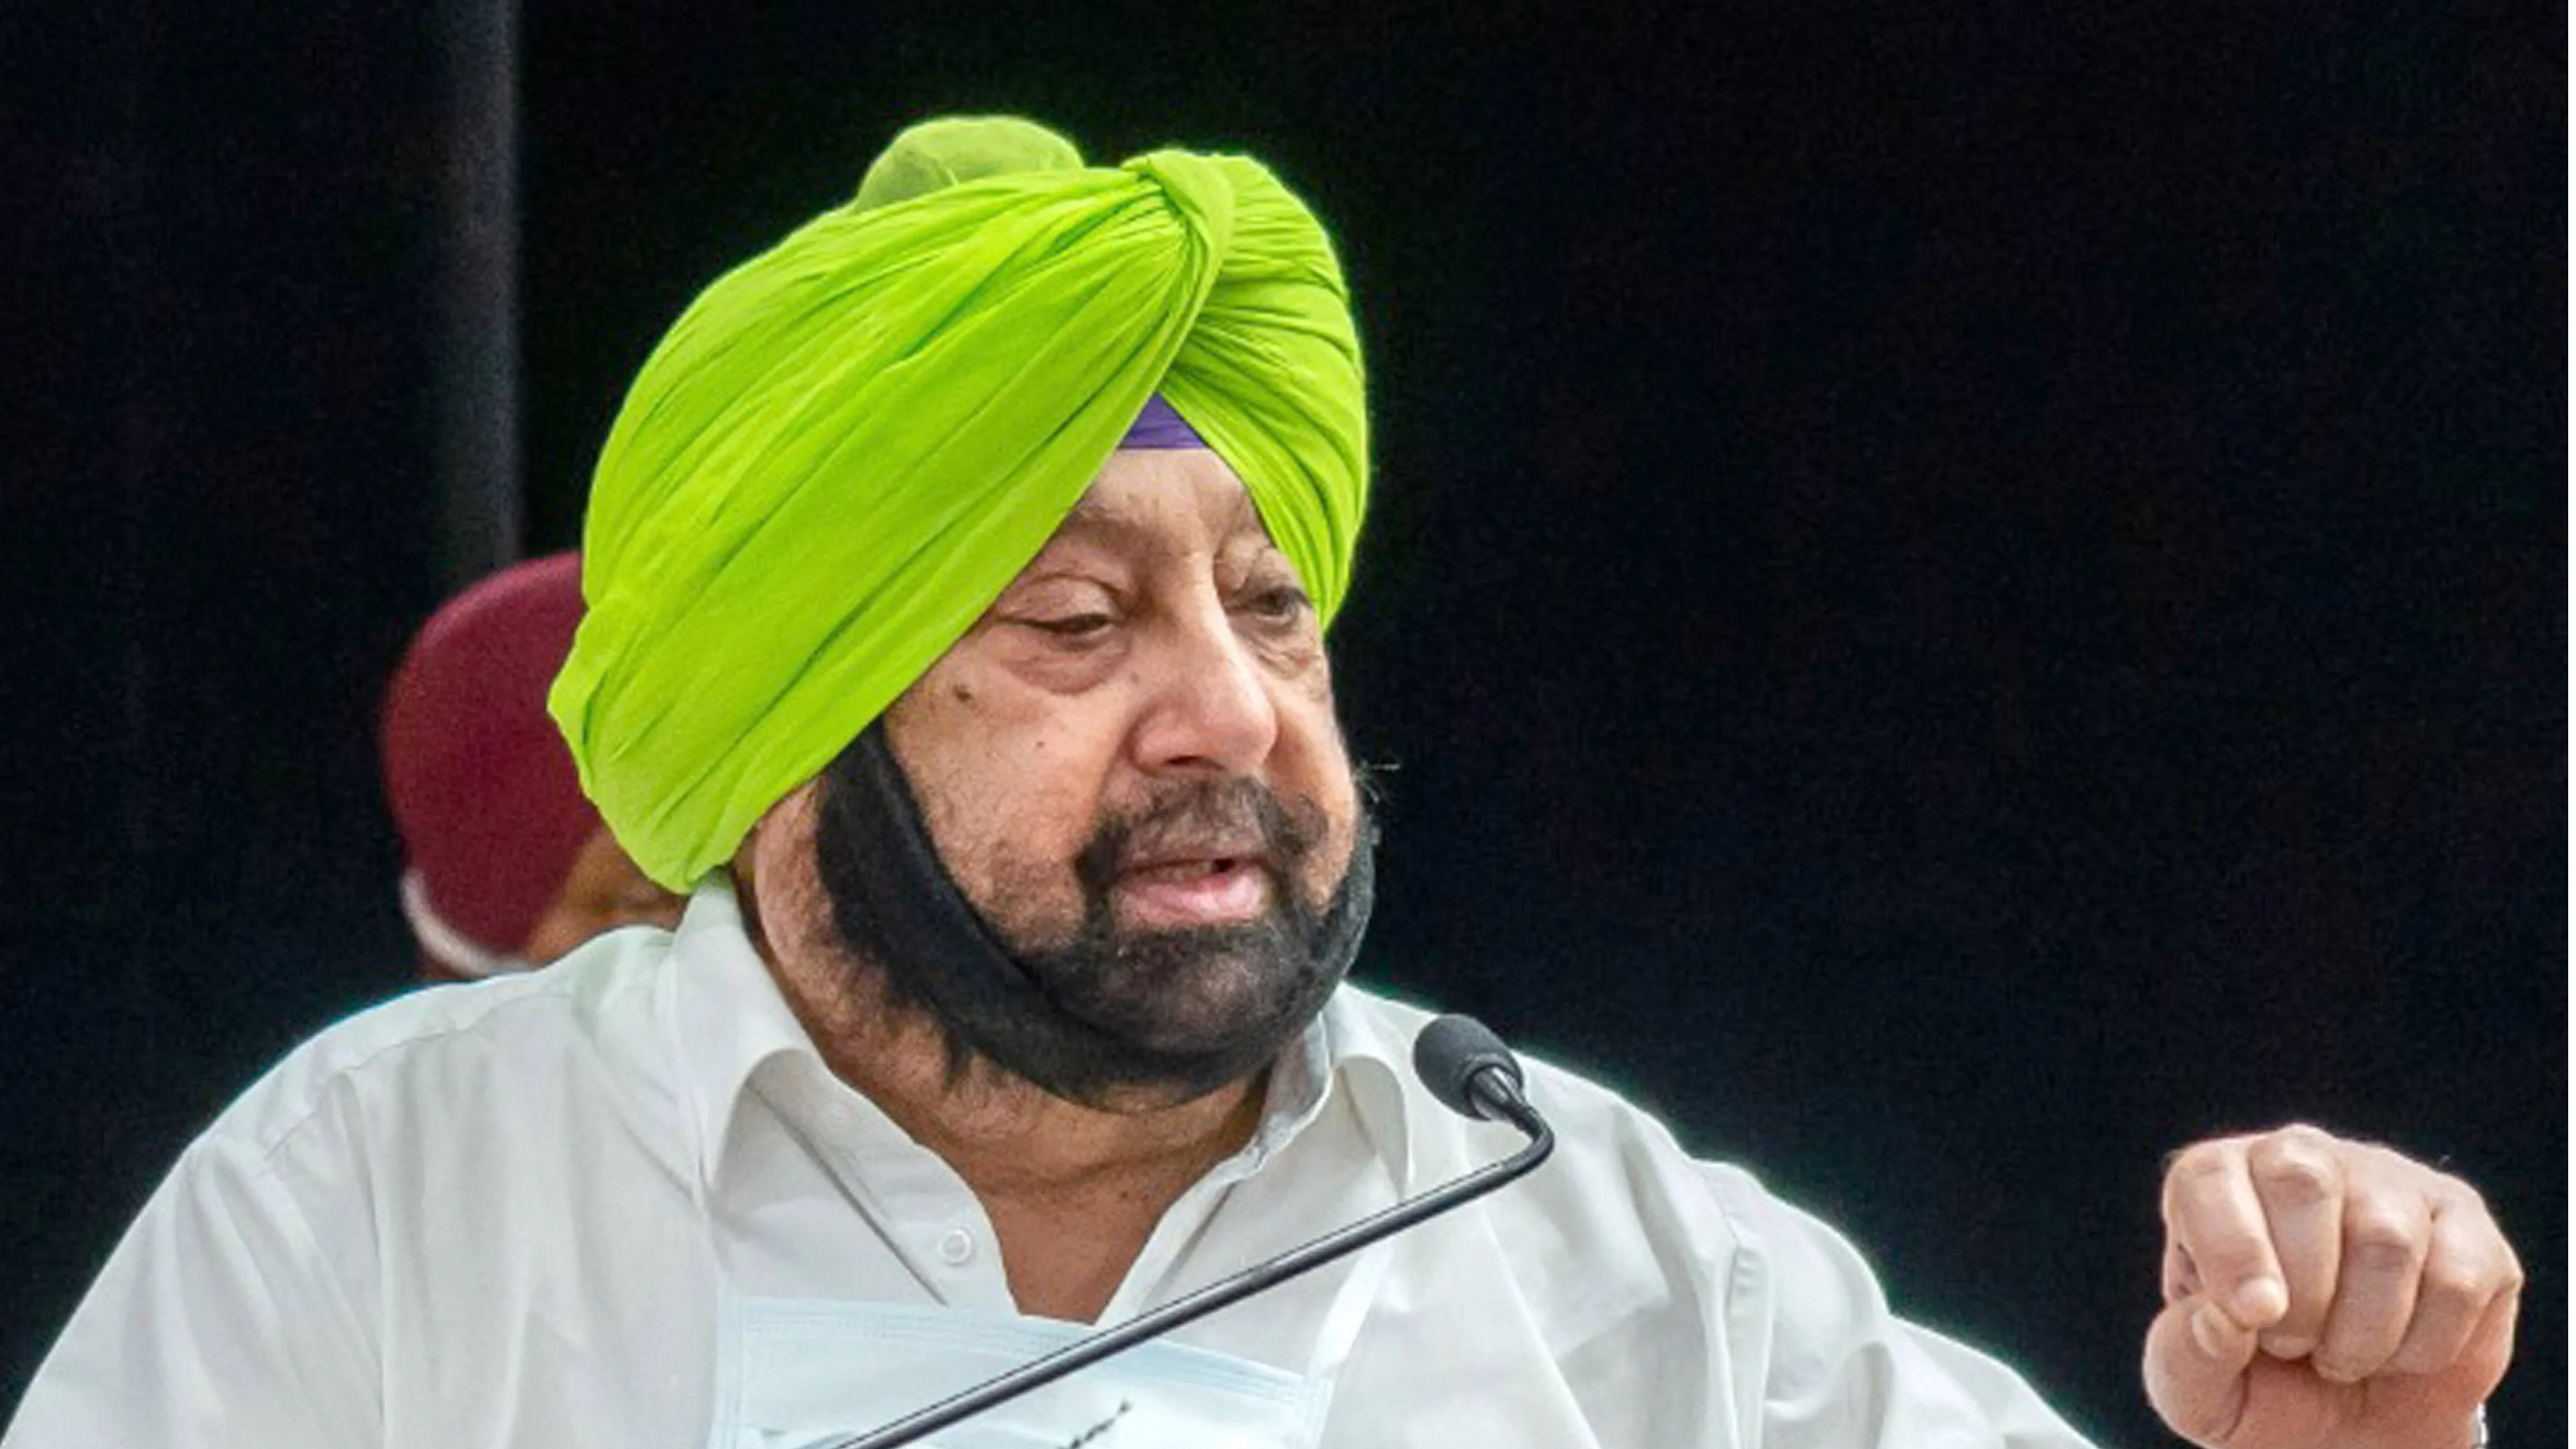 Feel humiliated, but still in Congress: Amarinder Singh after resignation